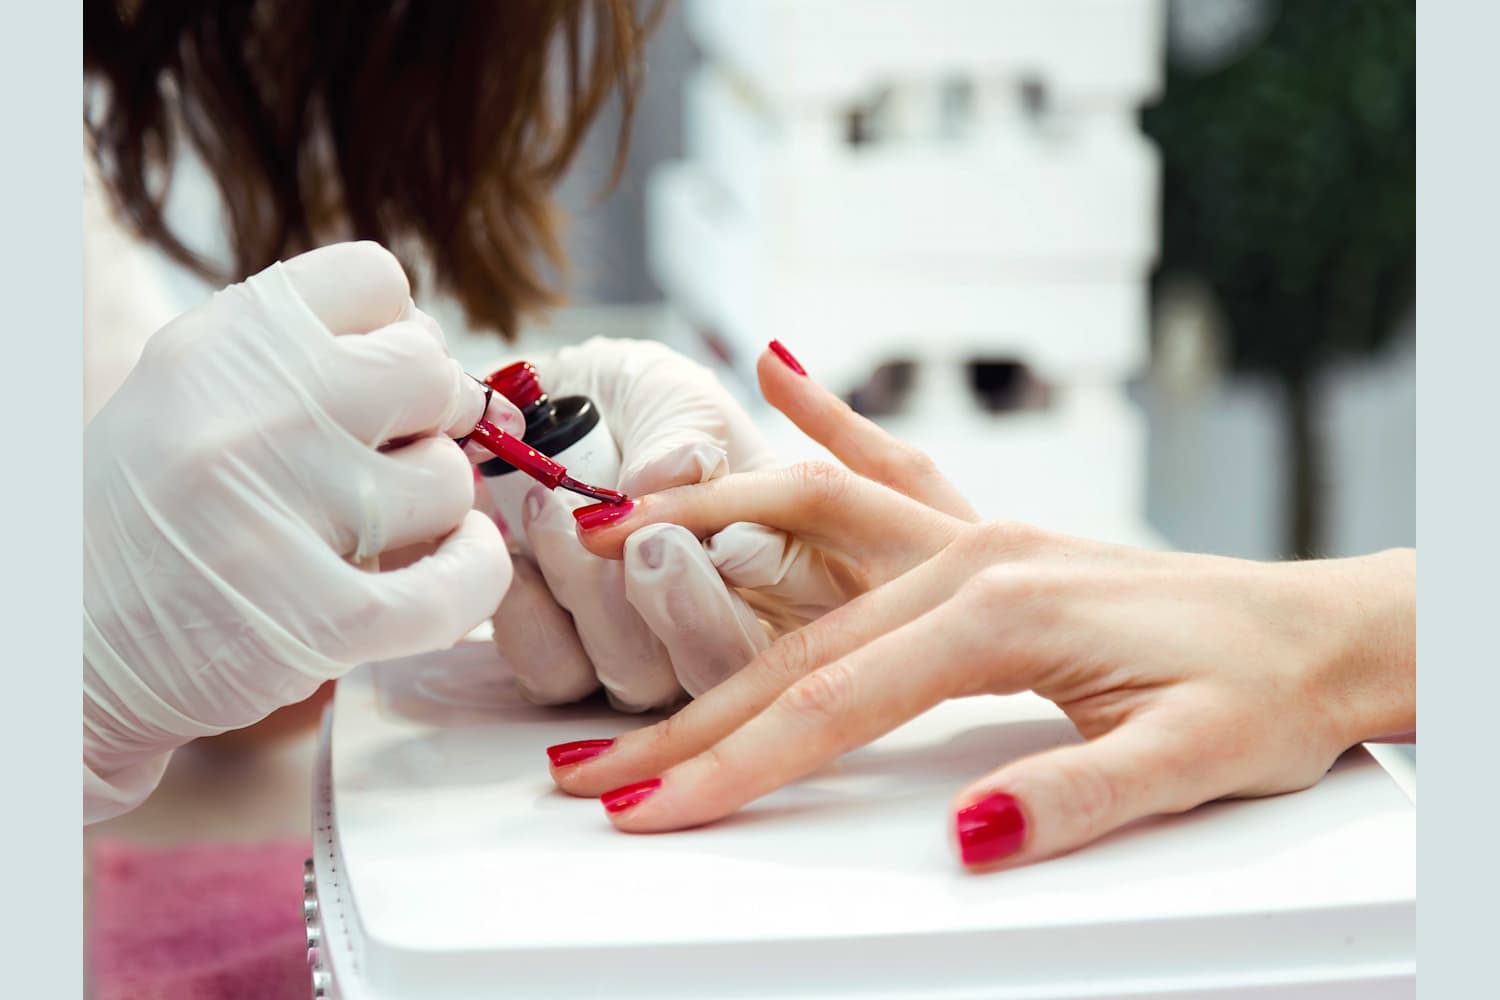 Classic Manicure and Pedicure with Foot Soak (2 Sessions) at Belle Lady - Get Deals, Cashback and Rewards with ShopBack GO